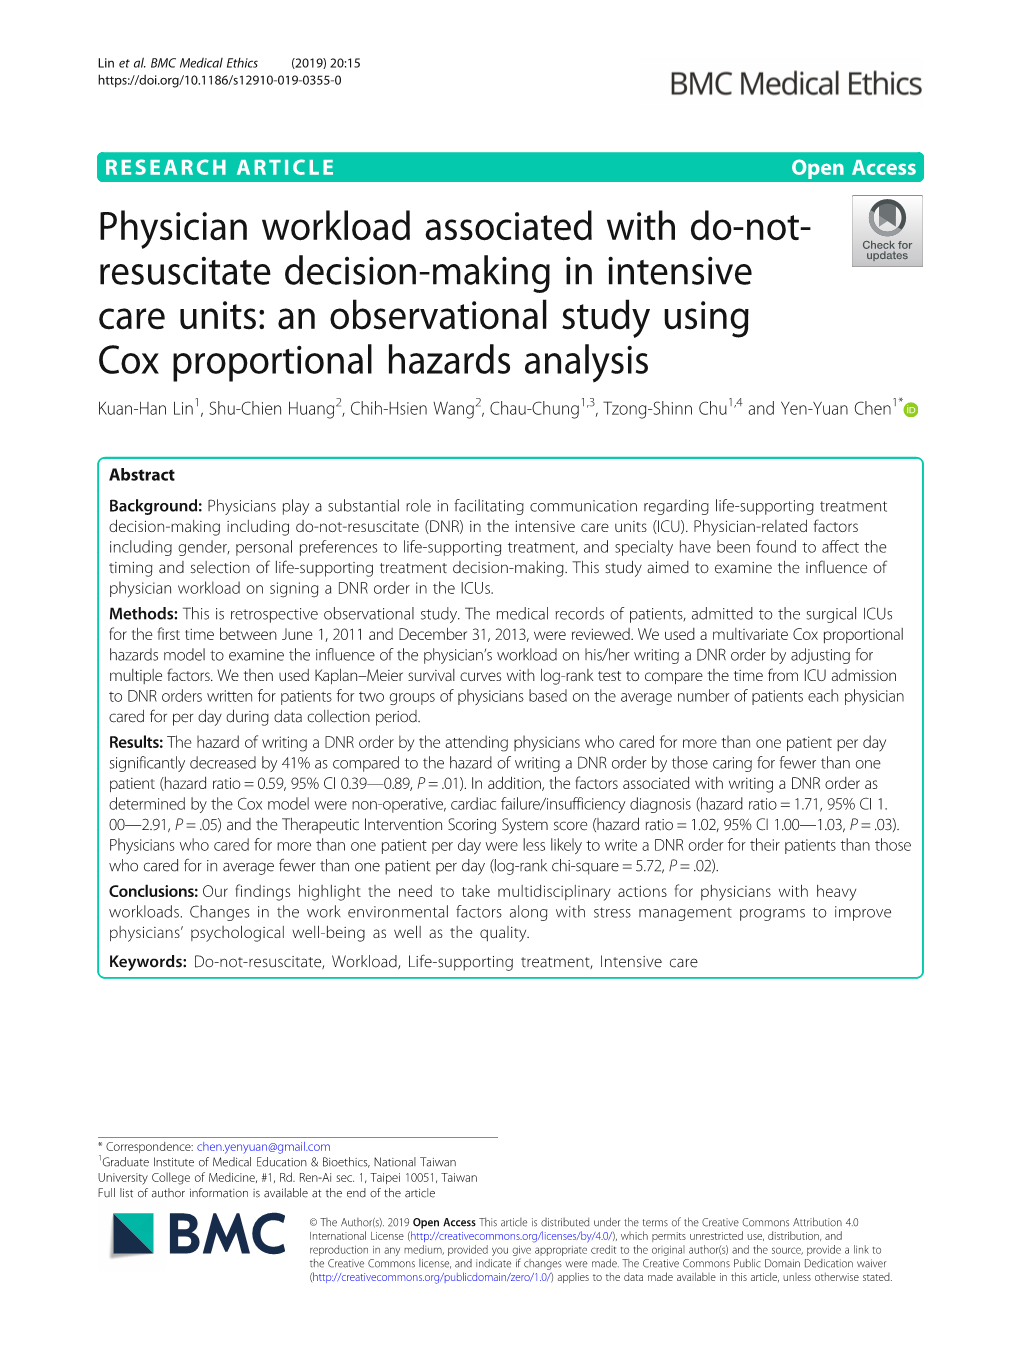 Physician Workload Associated with Do-Not